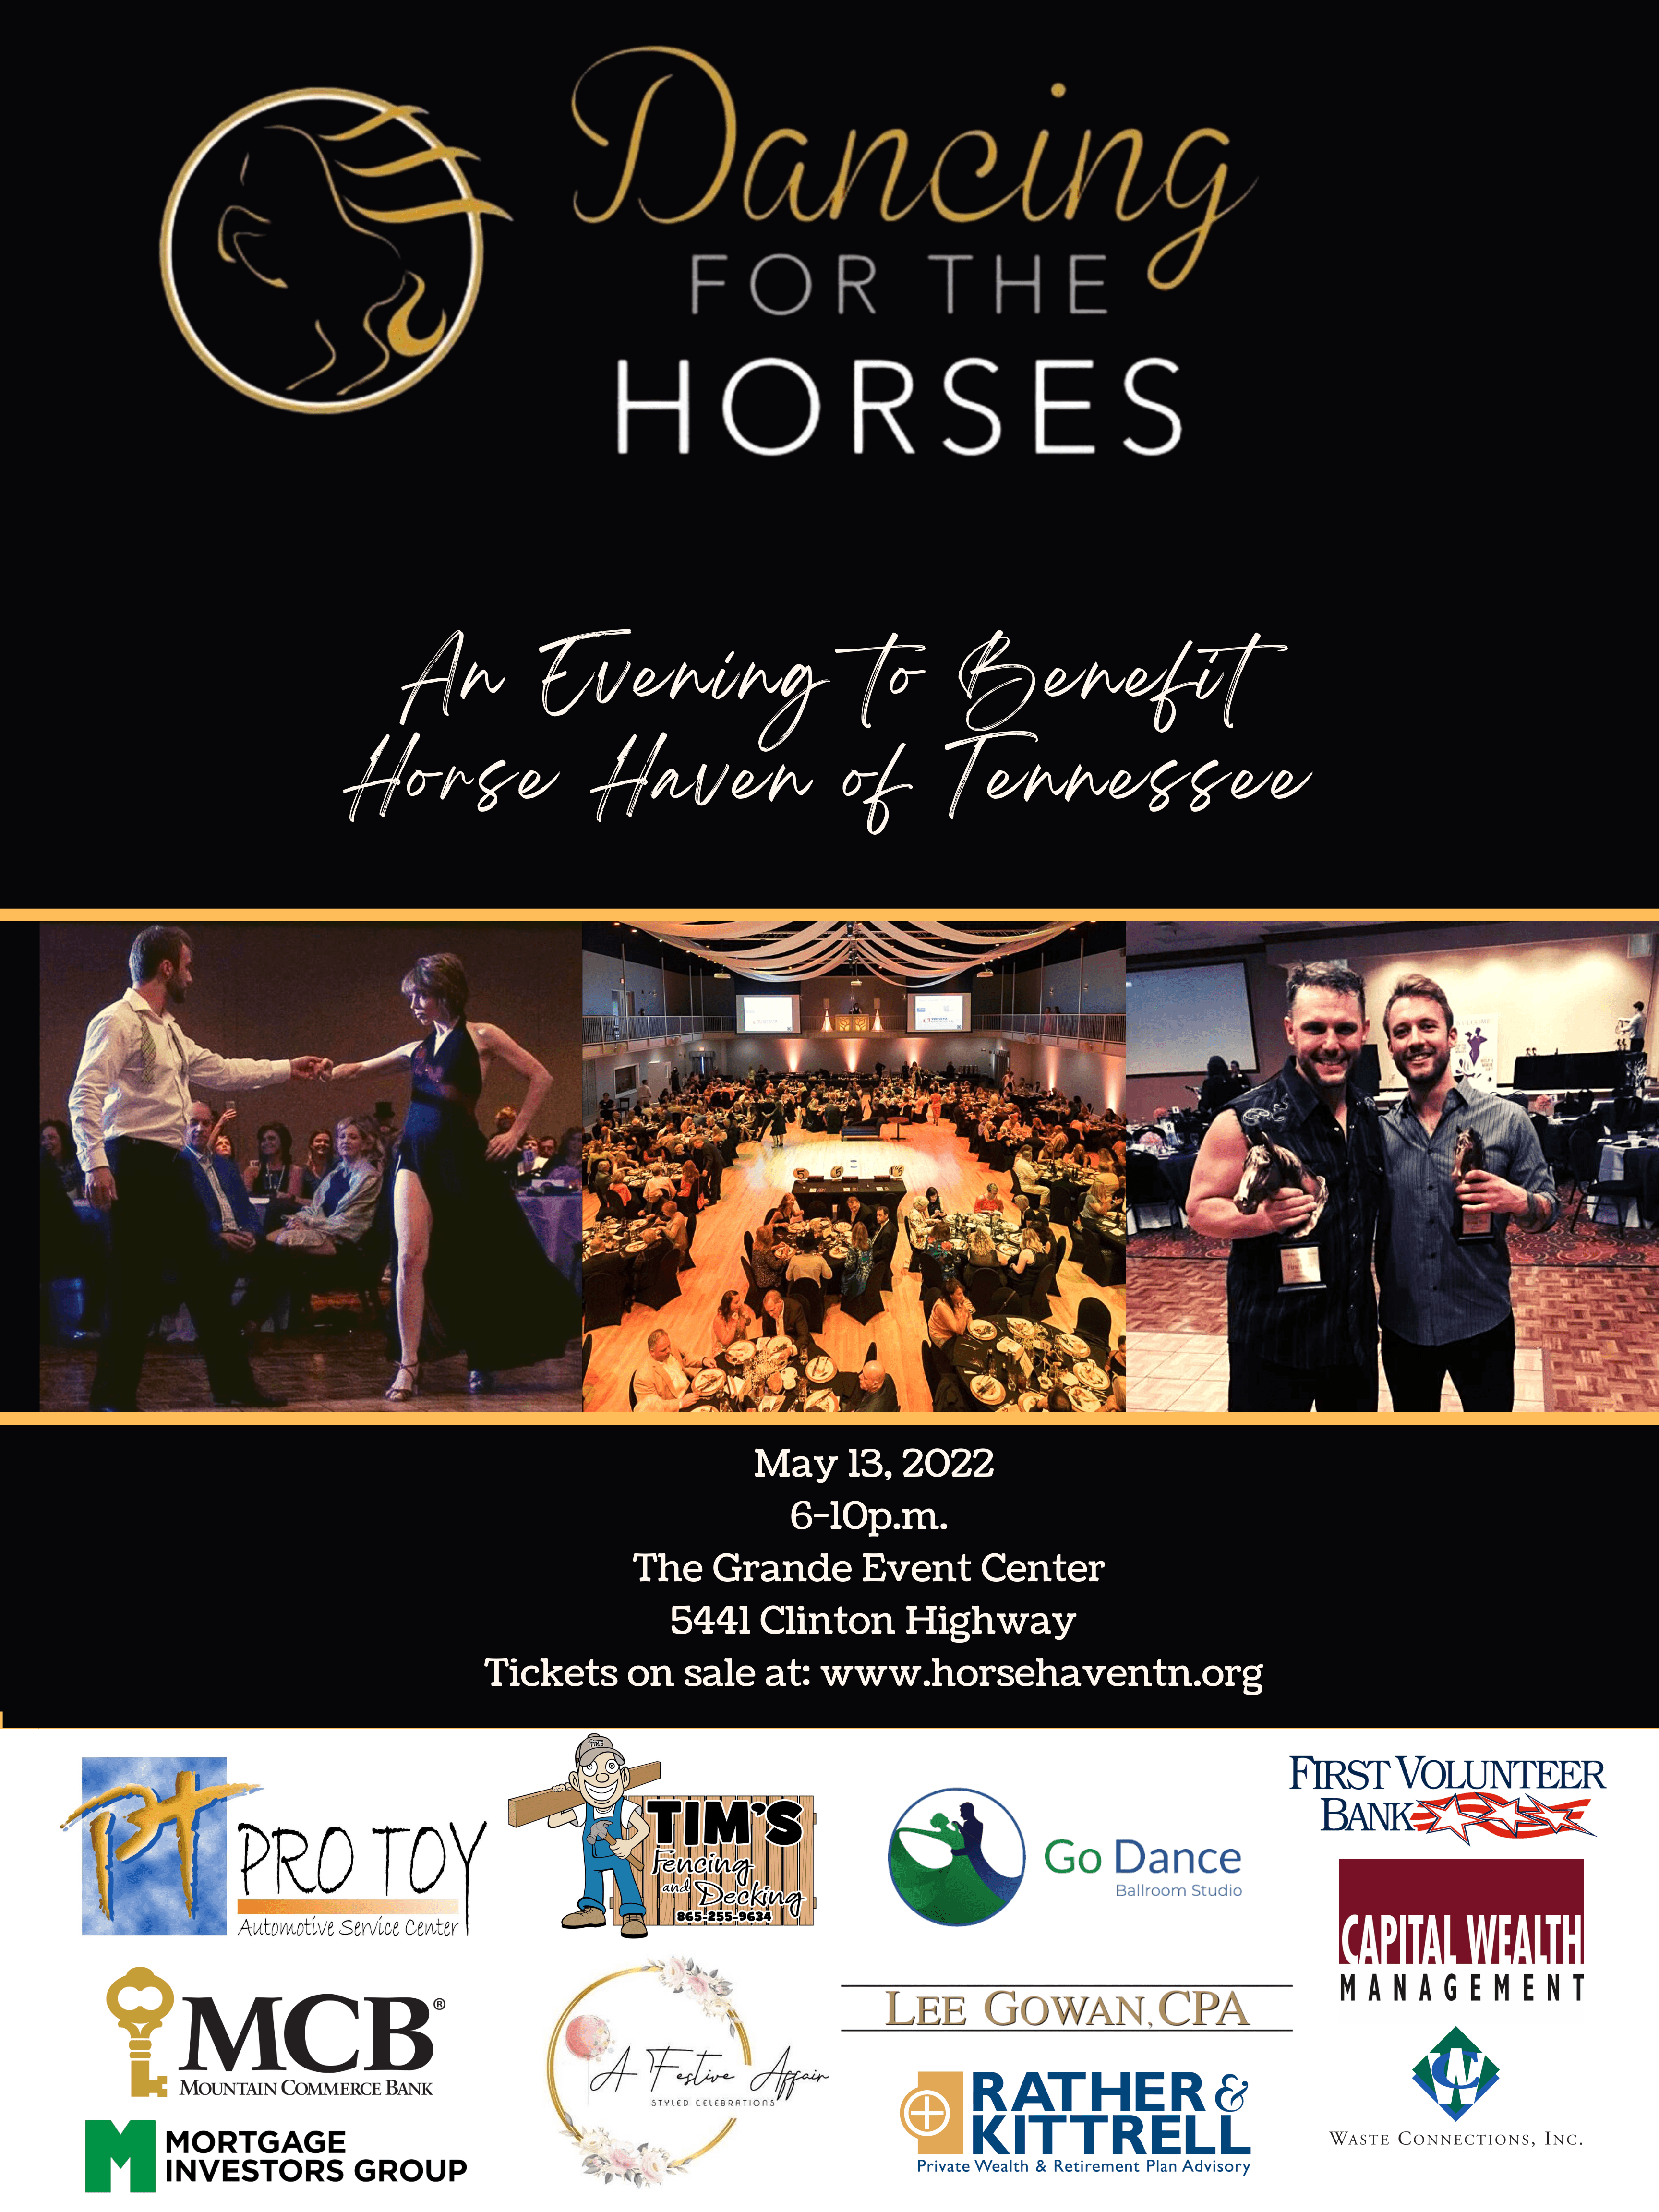 Join us for "Dancing for the Horses 2022"